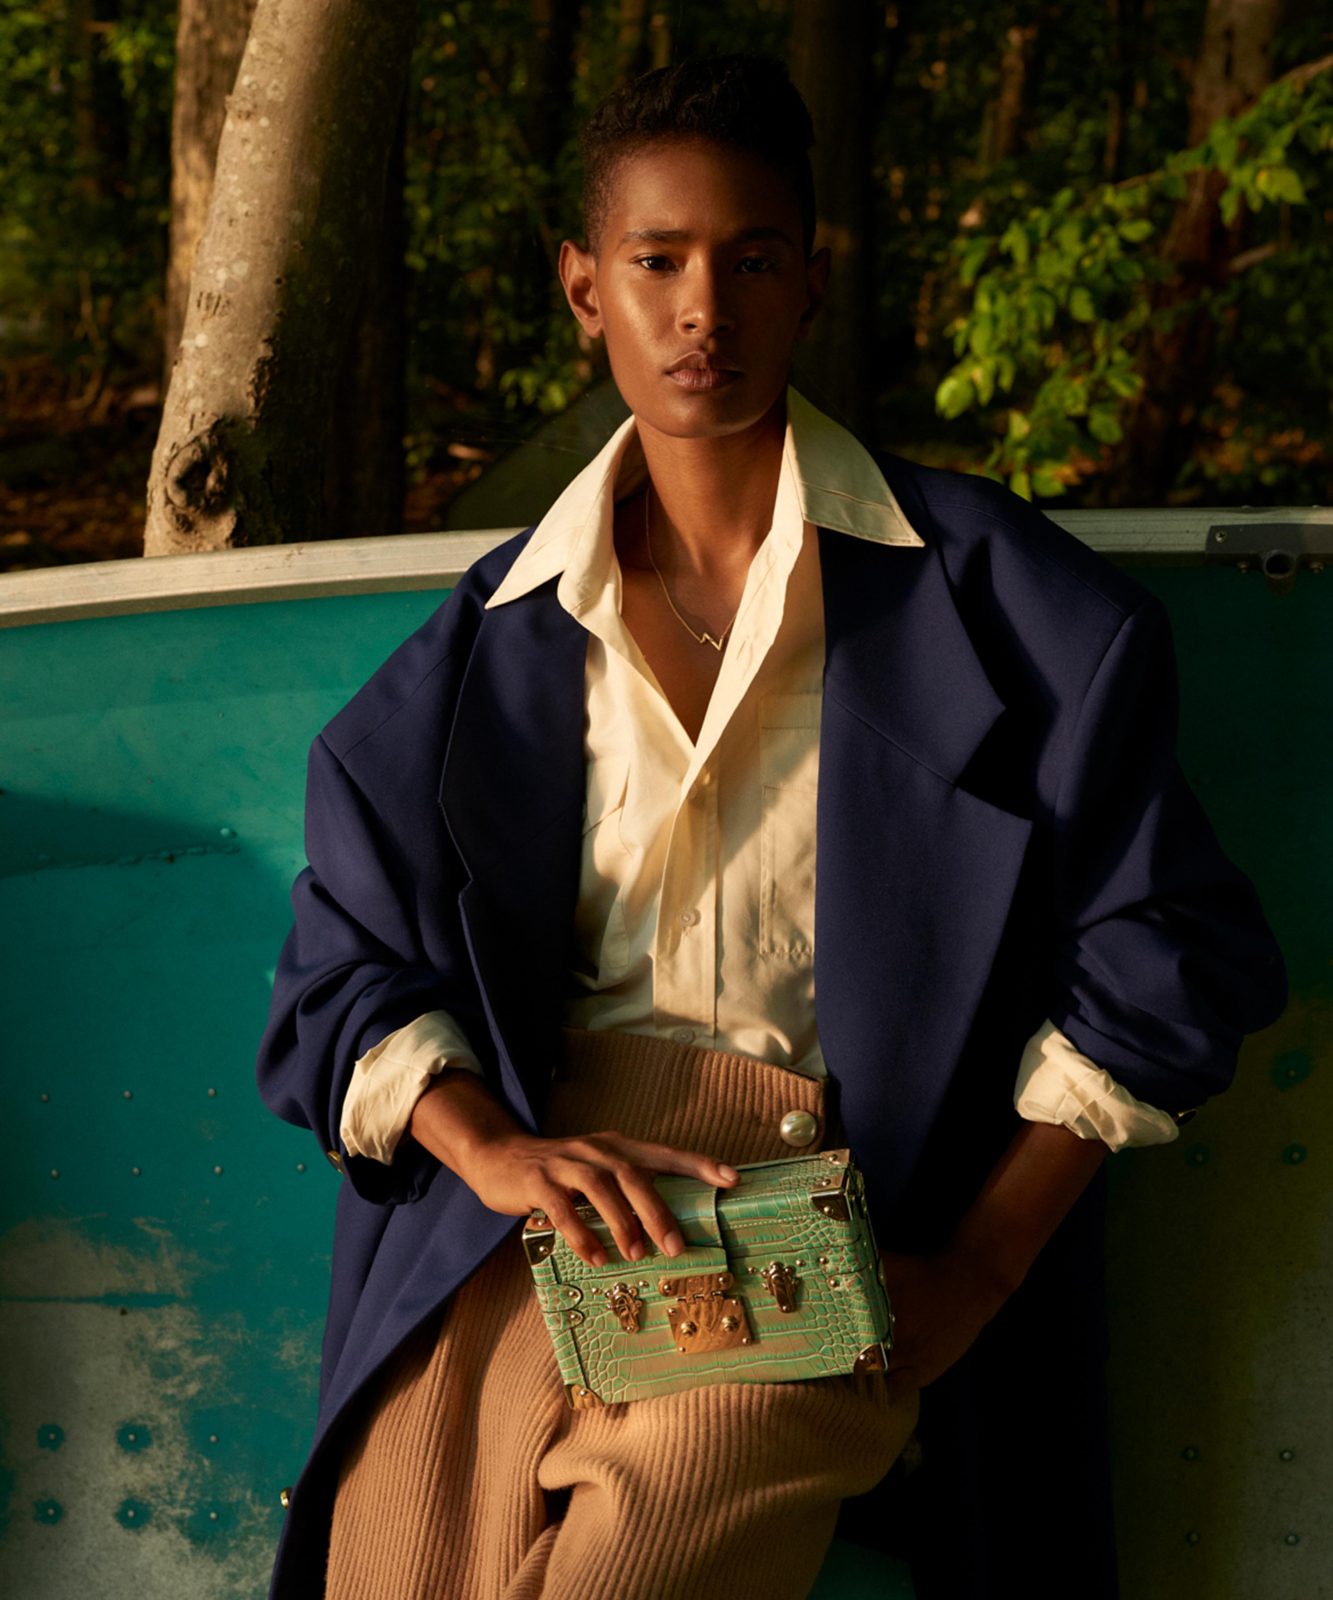 Natural Instincts: Haute Living's Exclusive Editorial Featuring Louis Vuitton's Fall 2022 Collection